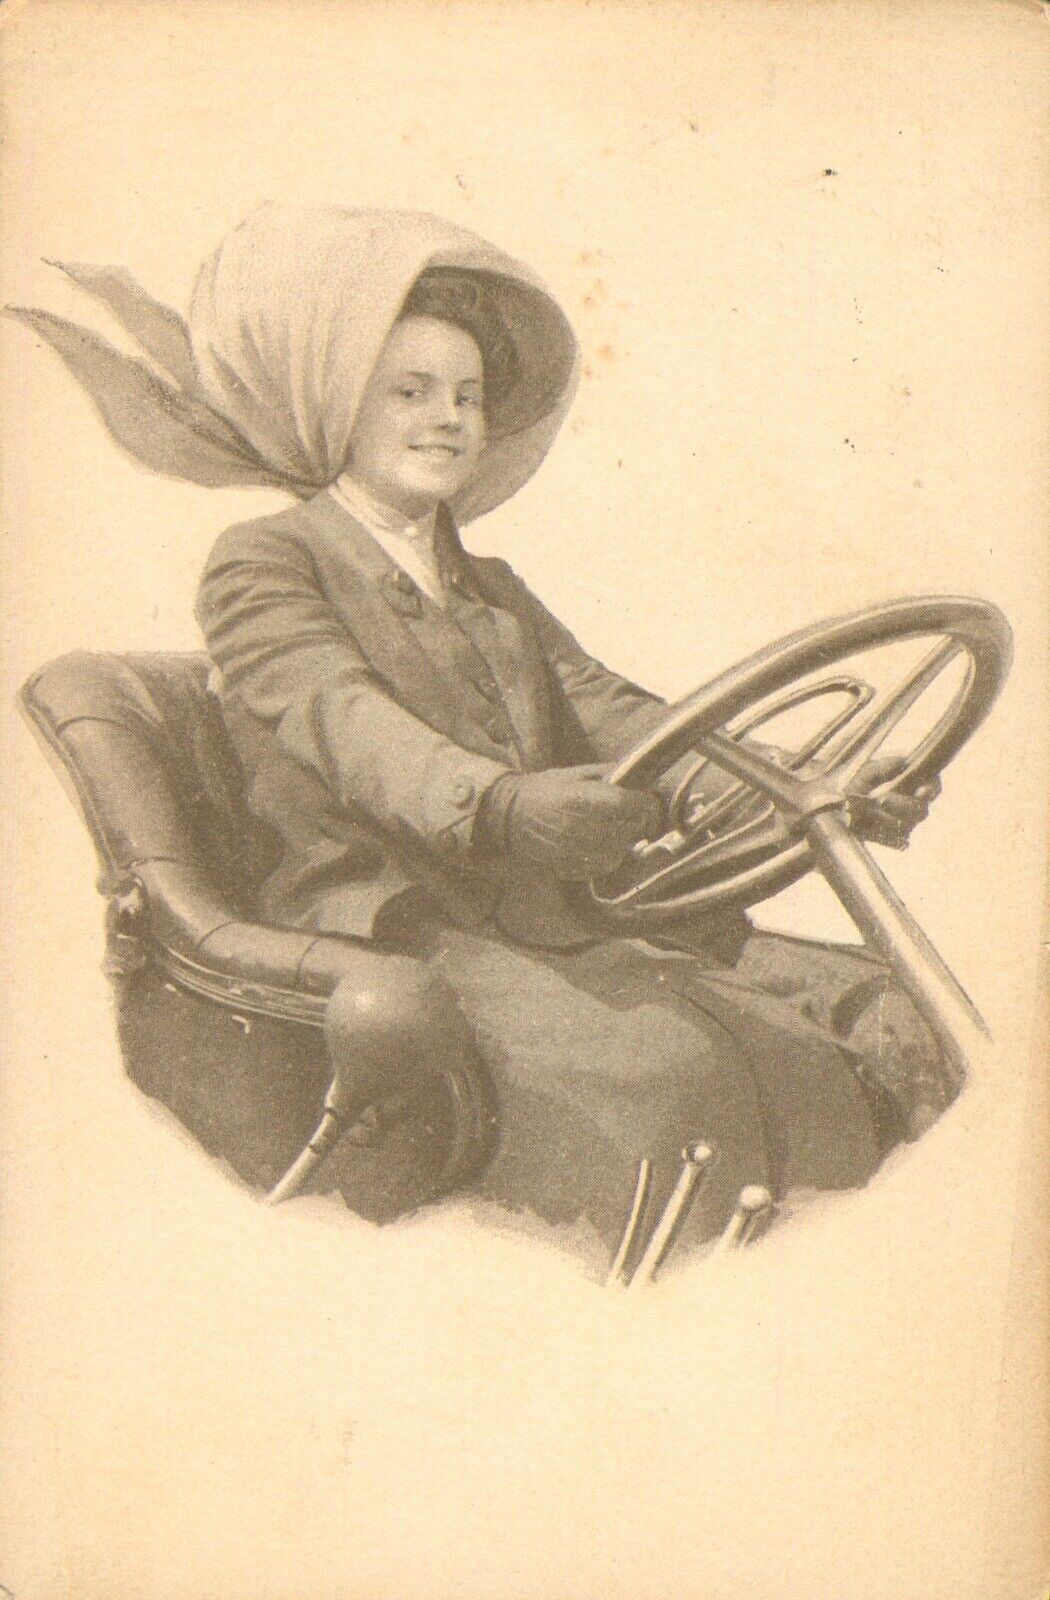 PRETTY LADY DRIVER wearing SCARF over HAT Antique POSTCARD 1915 Beautiful